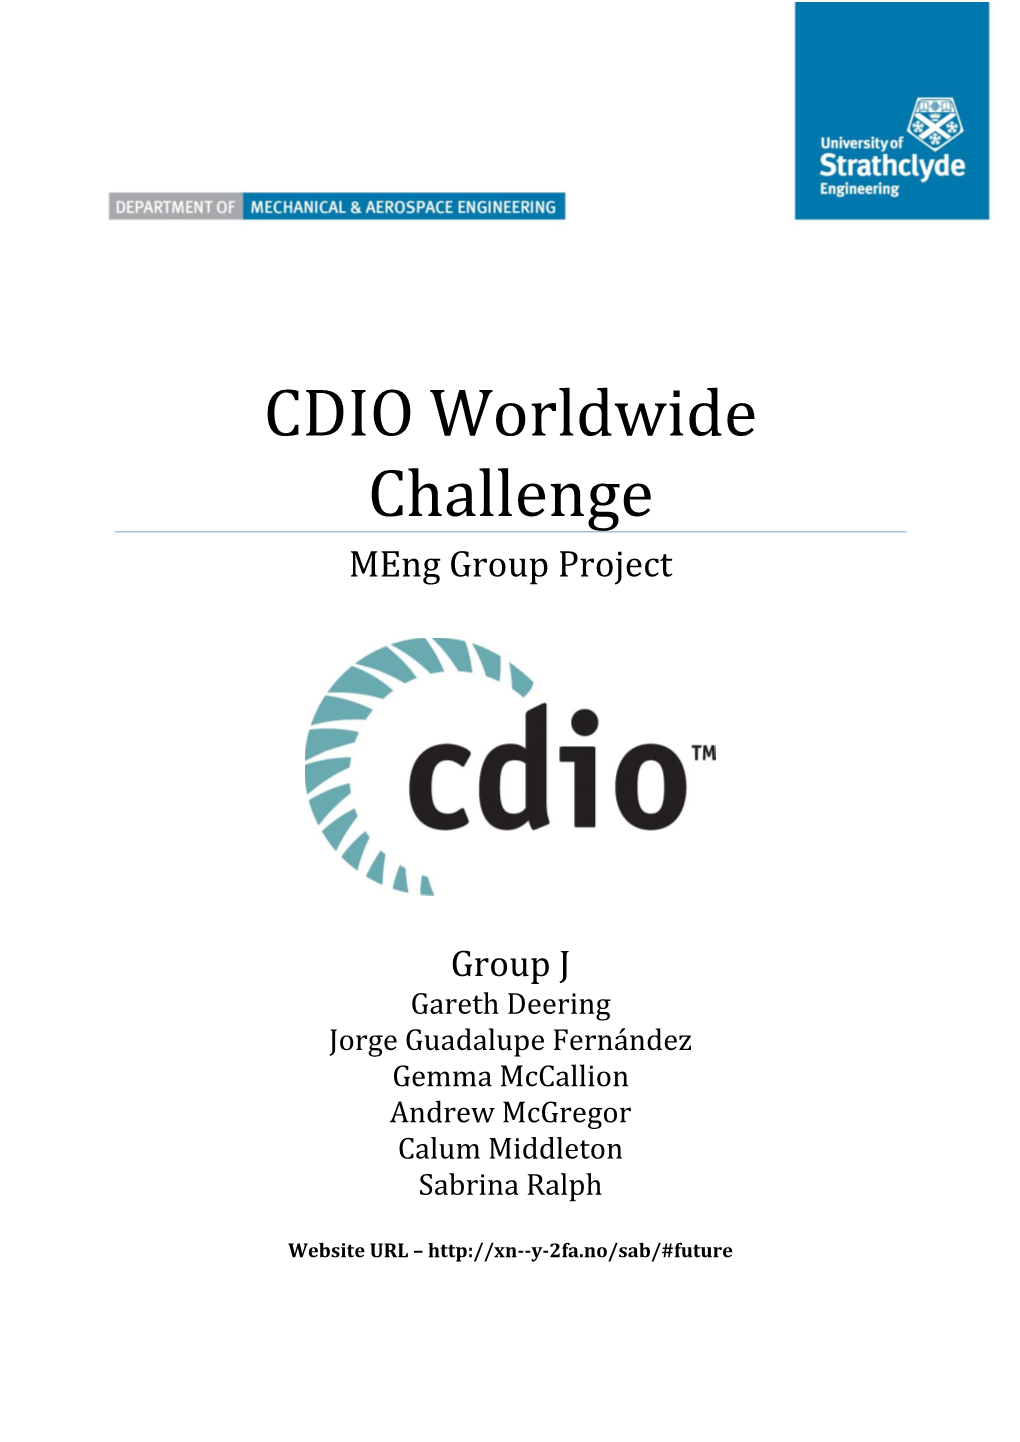 CDIO Worldwide Challenge Meng Group Project